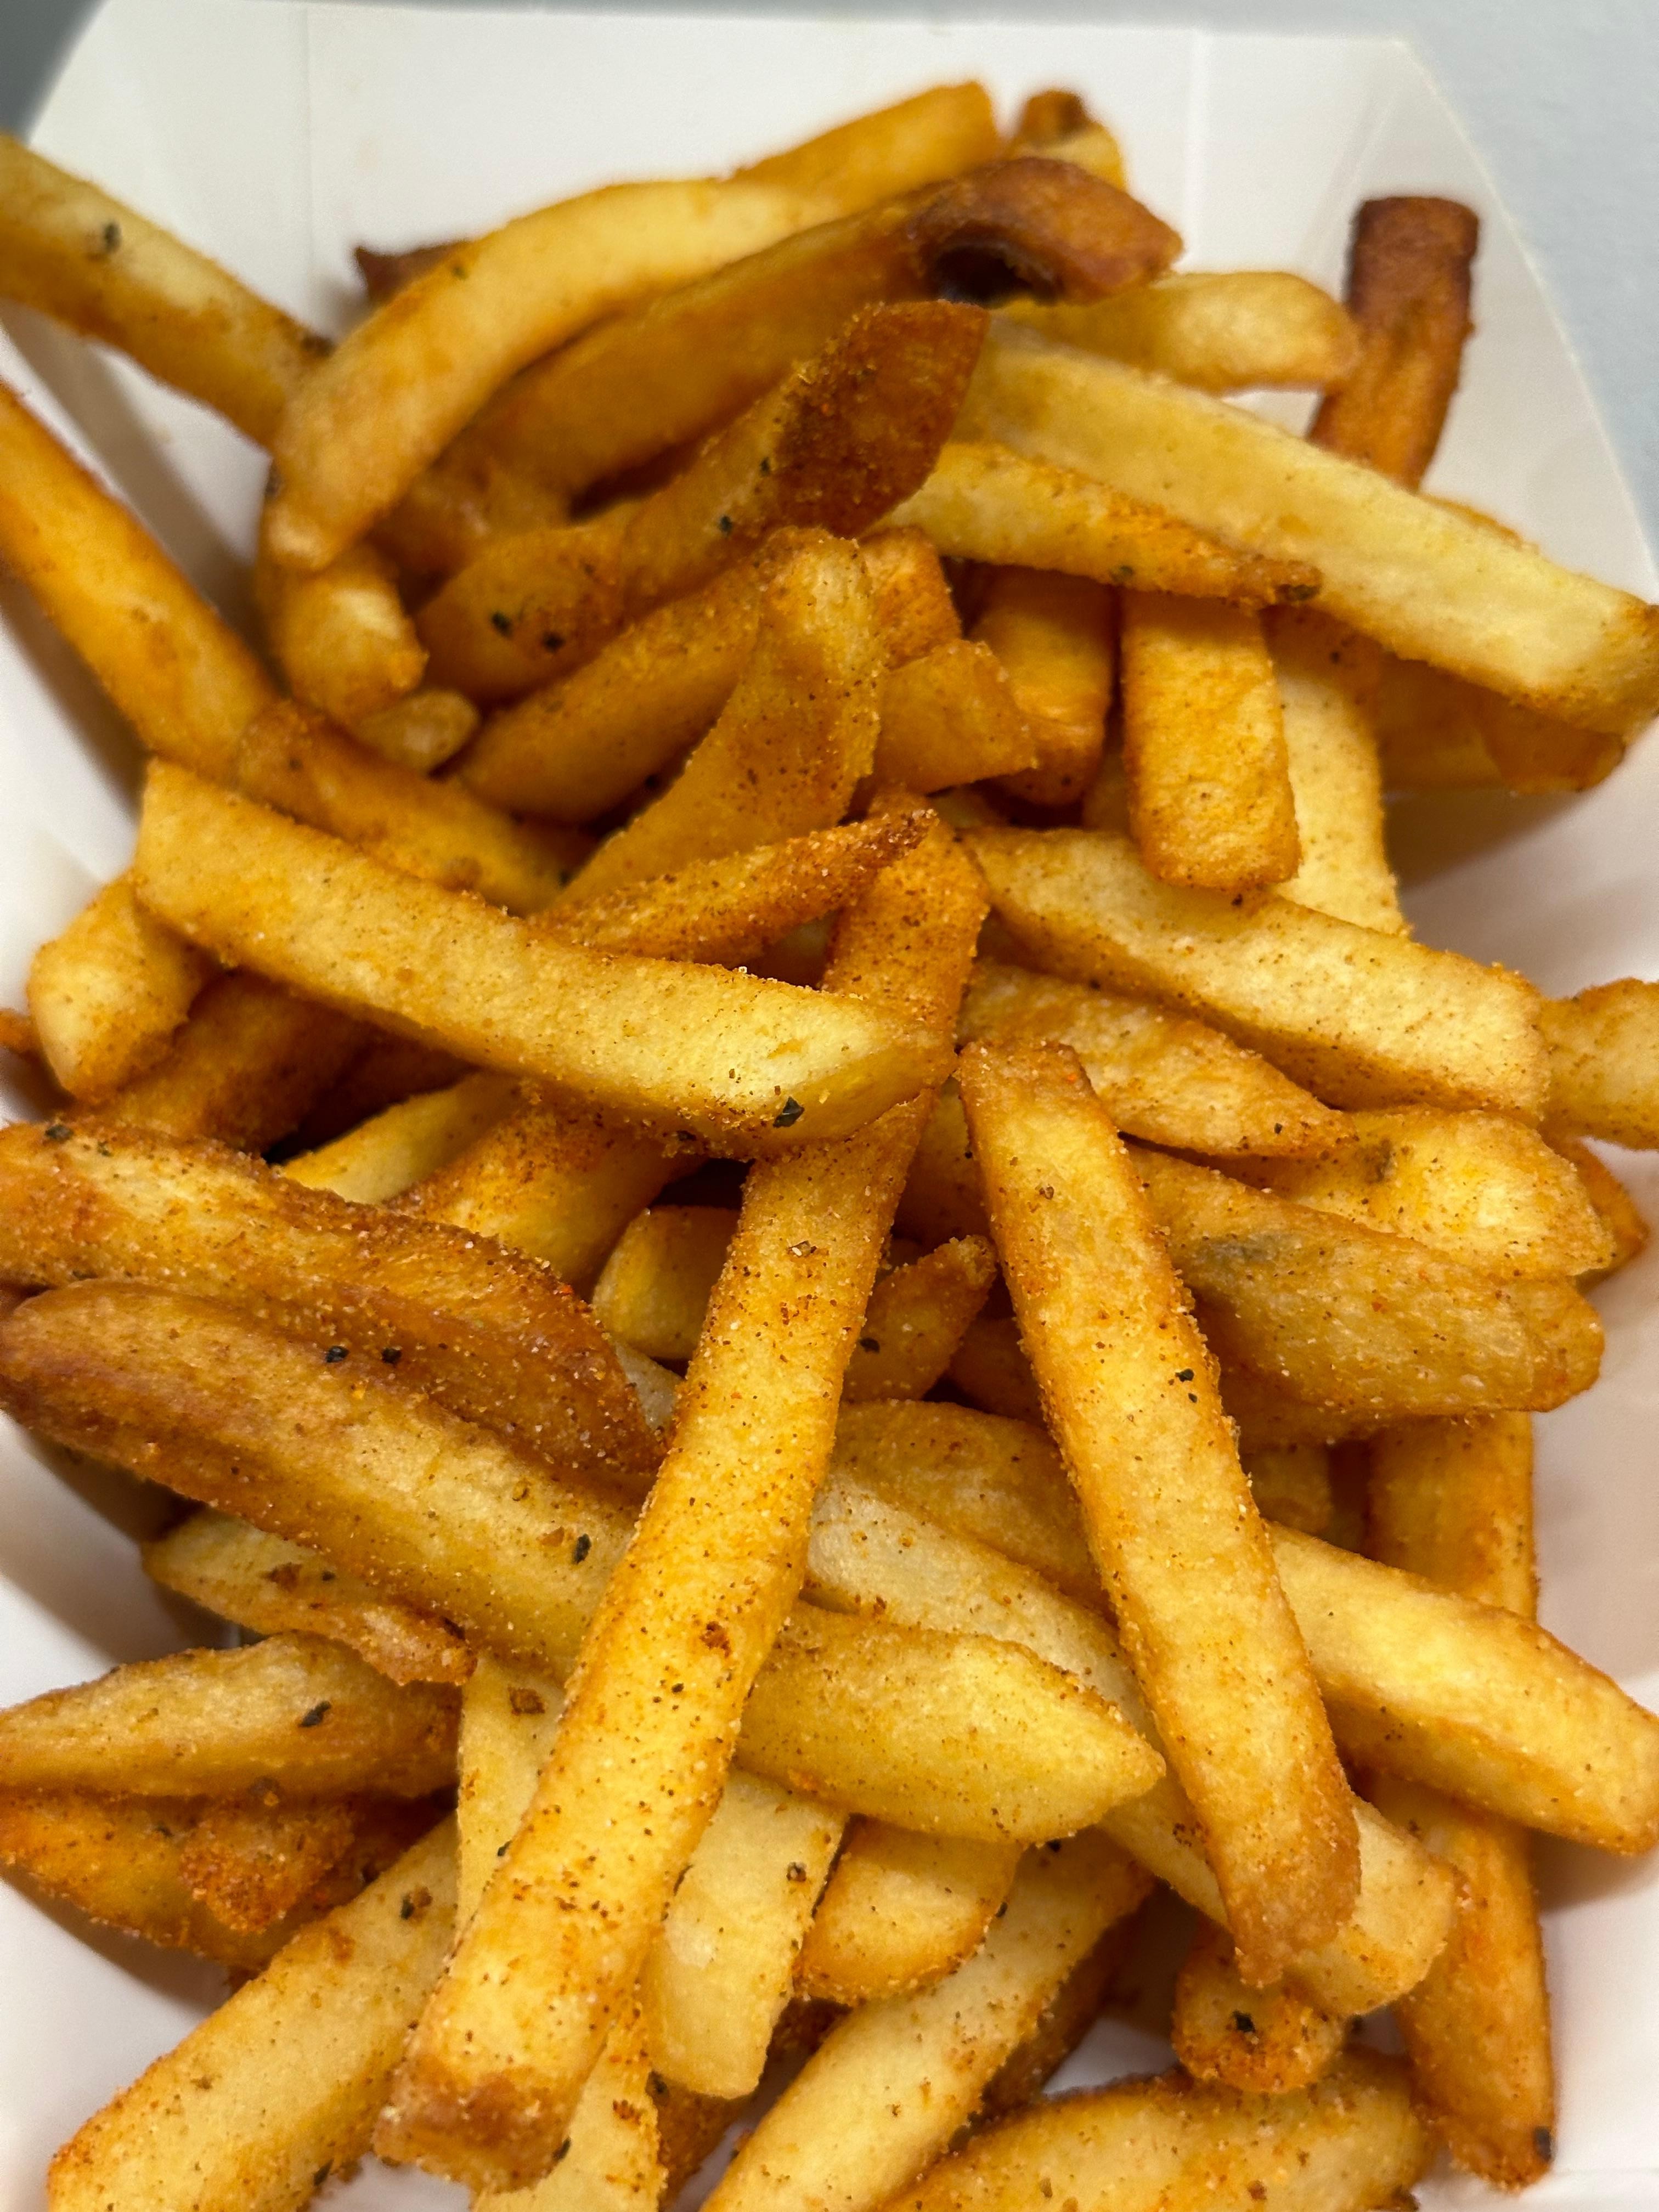 SIDE OF FRENCH FRIES